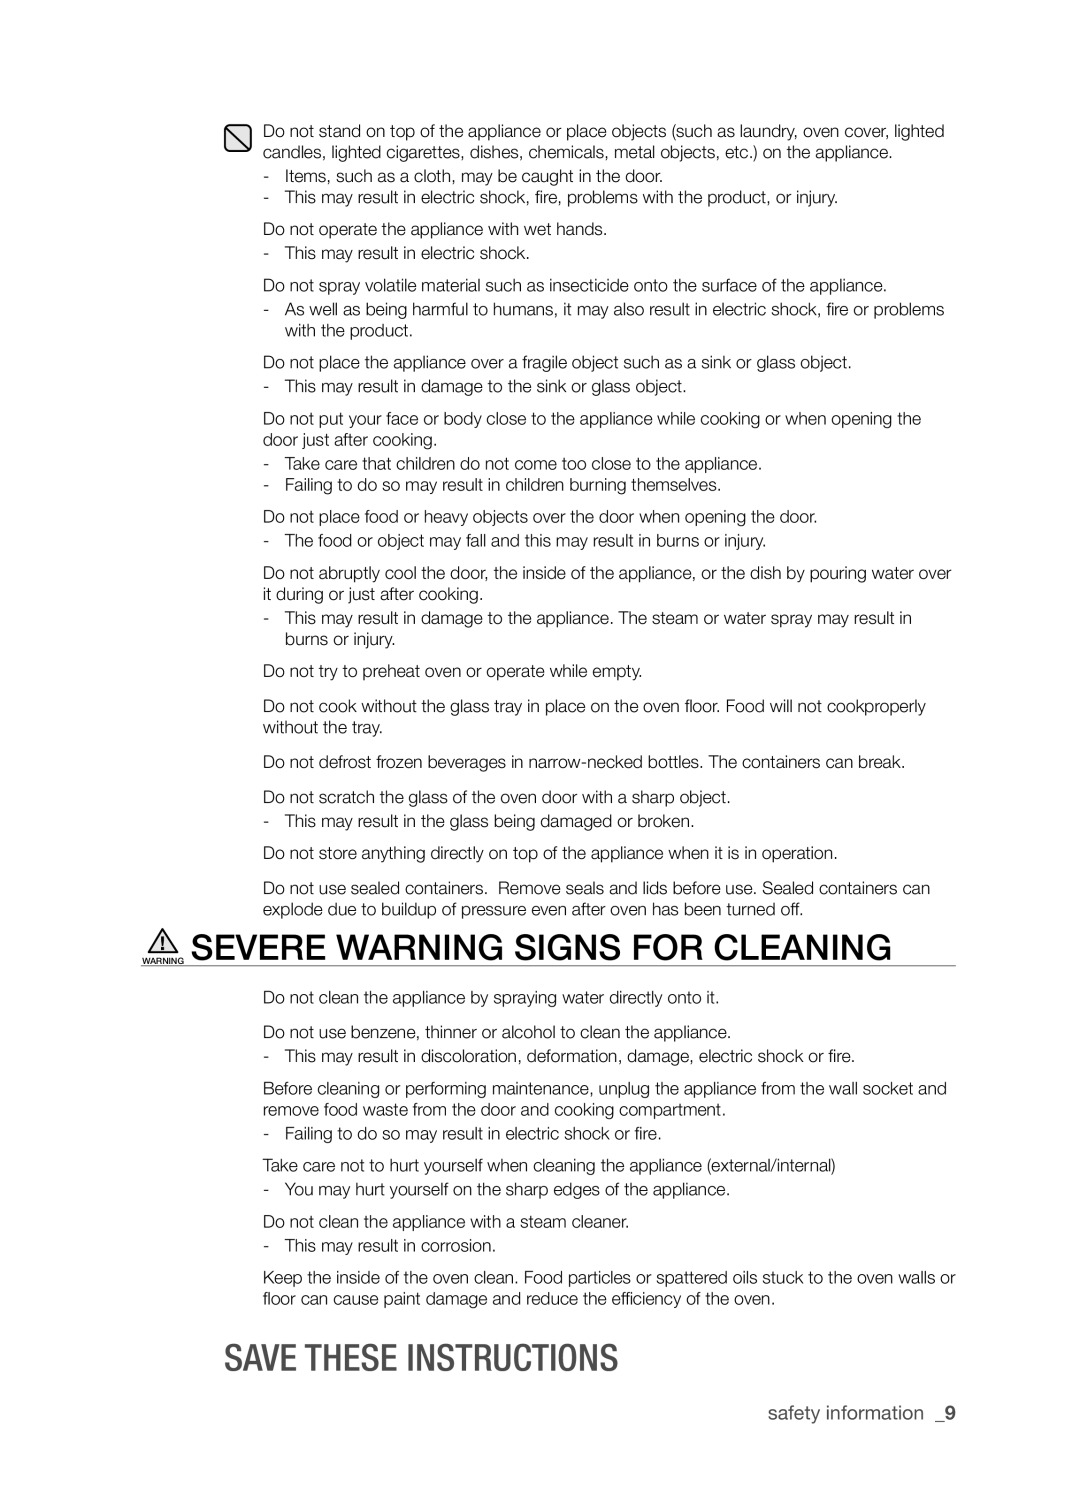 Samsung SMH9207 user manual Warning Severe Warning Signs For Cleaning, Save these instructions, safety information 